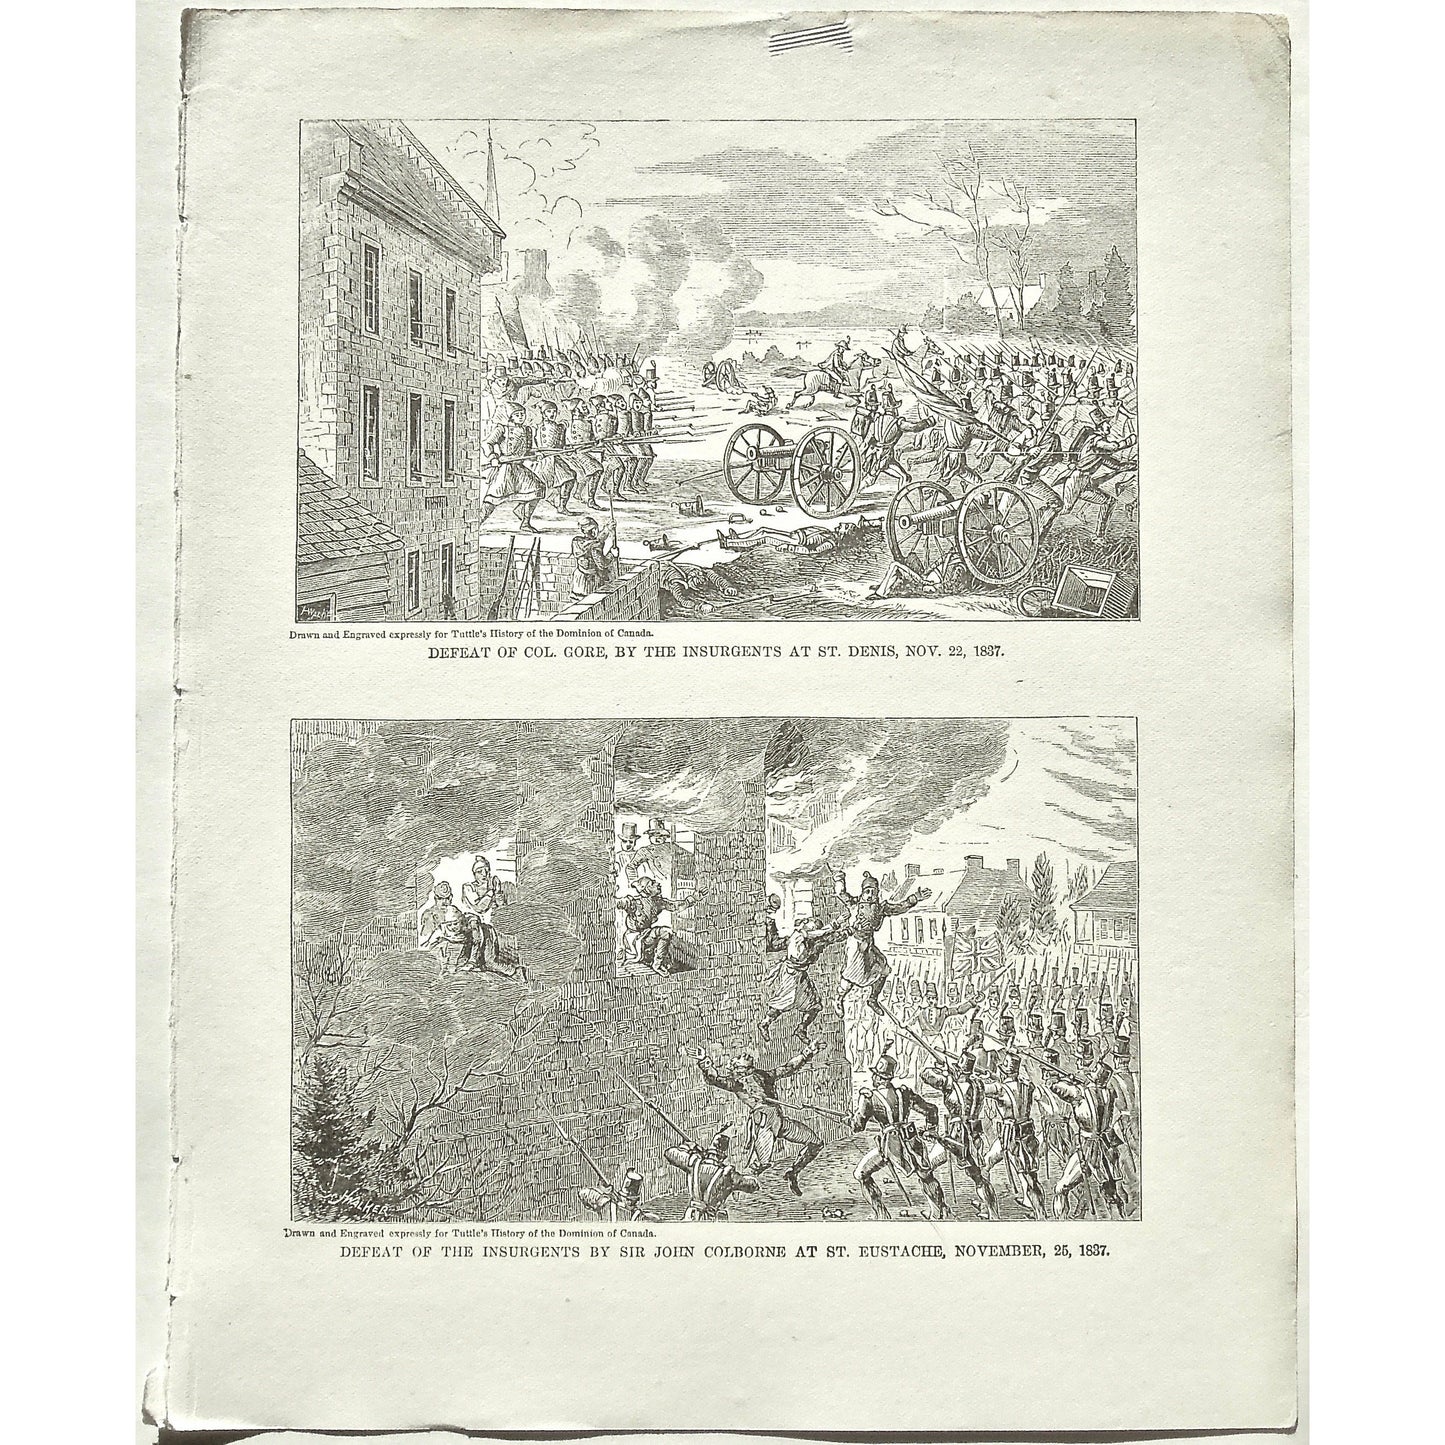 Keywords: Defeat of Col. Gore, by the Insurgents at St. Denis, Nov. 22, 1837, Defeat, Col. Gore, Colonel Gore, Insurgents, St. Denis, Defeat of the Insurgents by Sir John Colborne at St. Eustache, November, 25, Sir John Colborne, Sir Colborne, St. Eustache, Canada, Weapons, Guns, War, Army, Formation, Canons, Burning, Tuttle, Charles Tuttle, History of the Dominion, Popular History of the Dominion, Downie, Bigney, History, Dominion, Canada, Canadian History, Antique, Antique Print, Steel Engraving, prints,